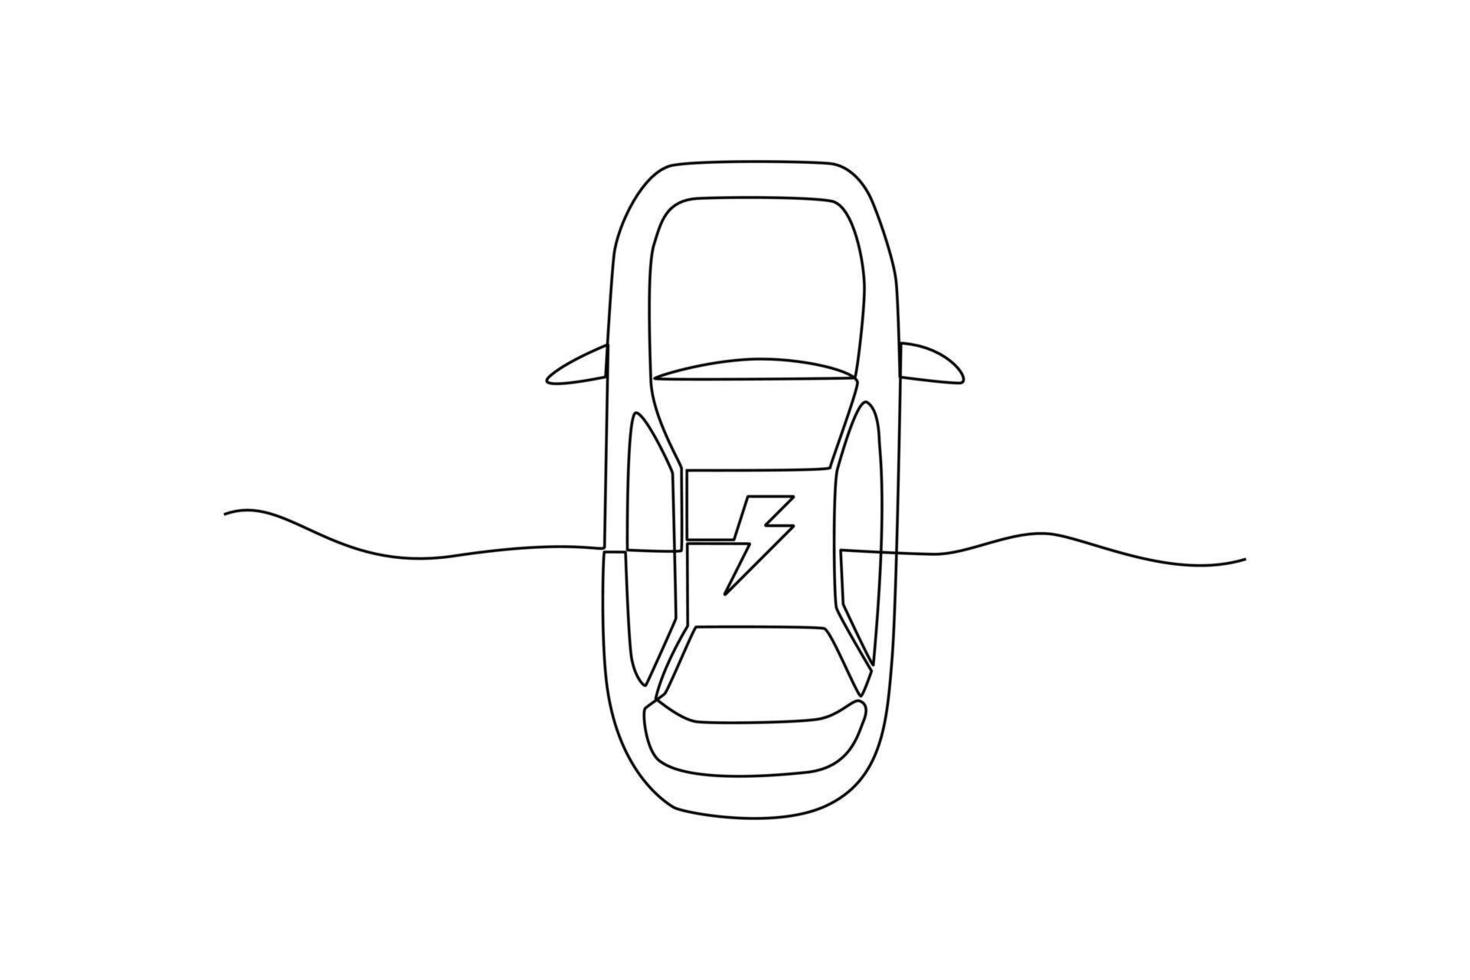 Continuous one line drawing sedan. Electric car concept. Single line draw design vector graphic illustration.